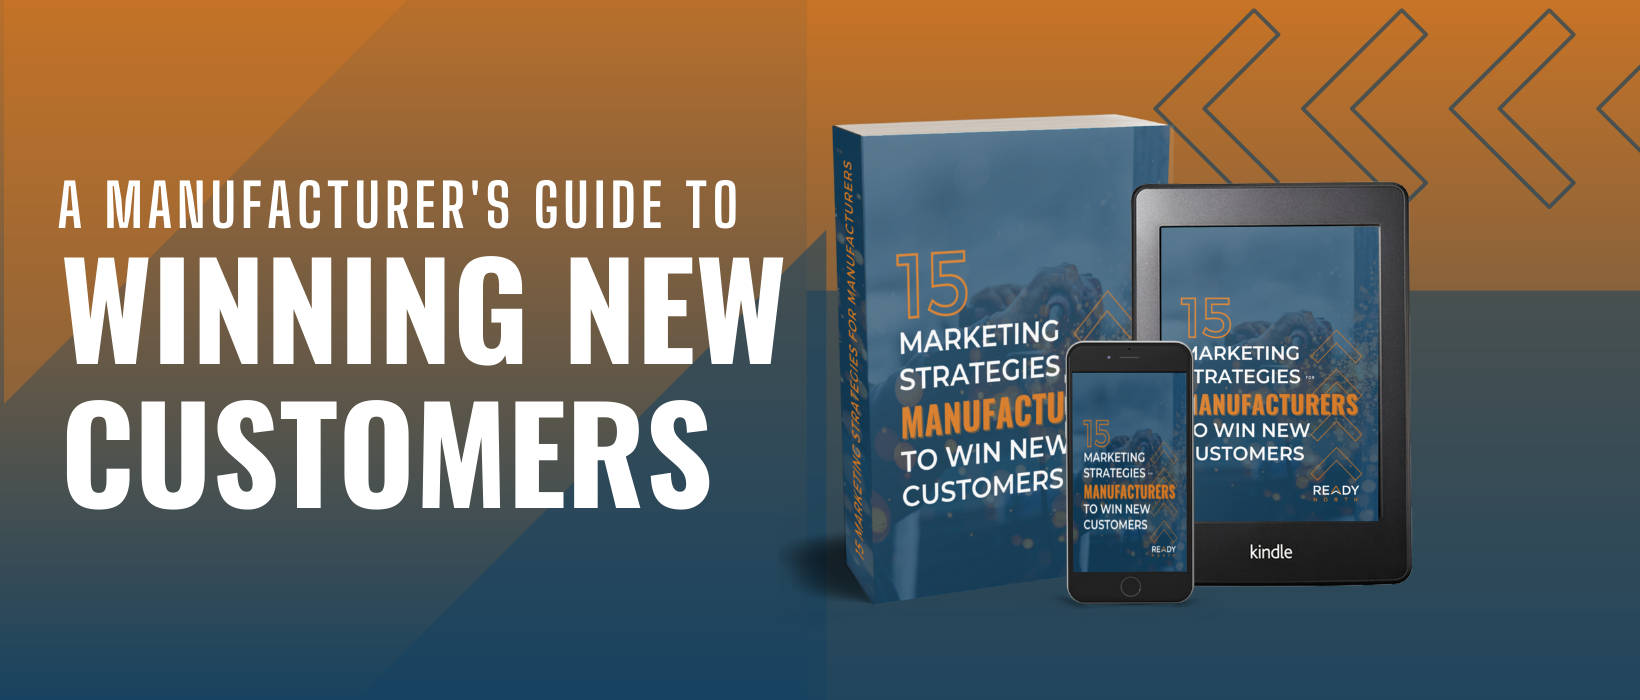 15 Proven Marketing Strategies for Manufacturers to Win New Customers